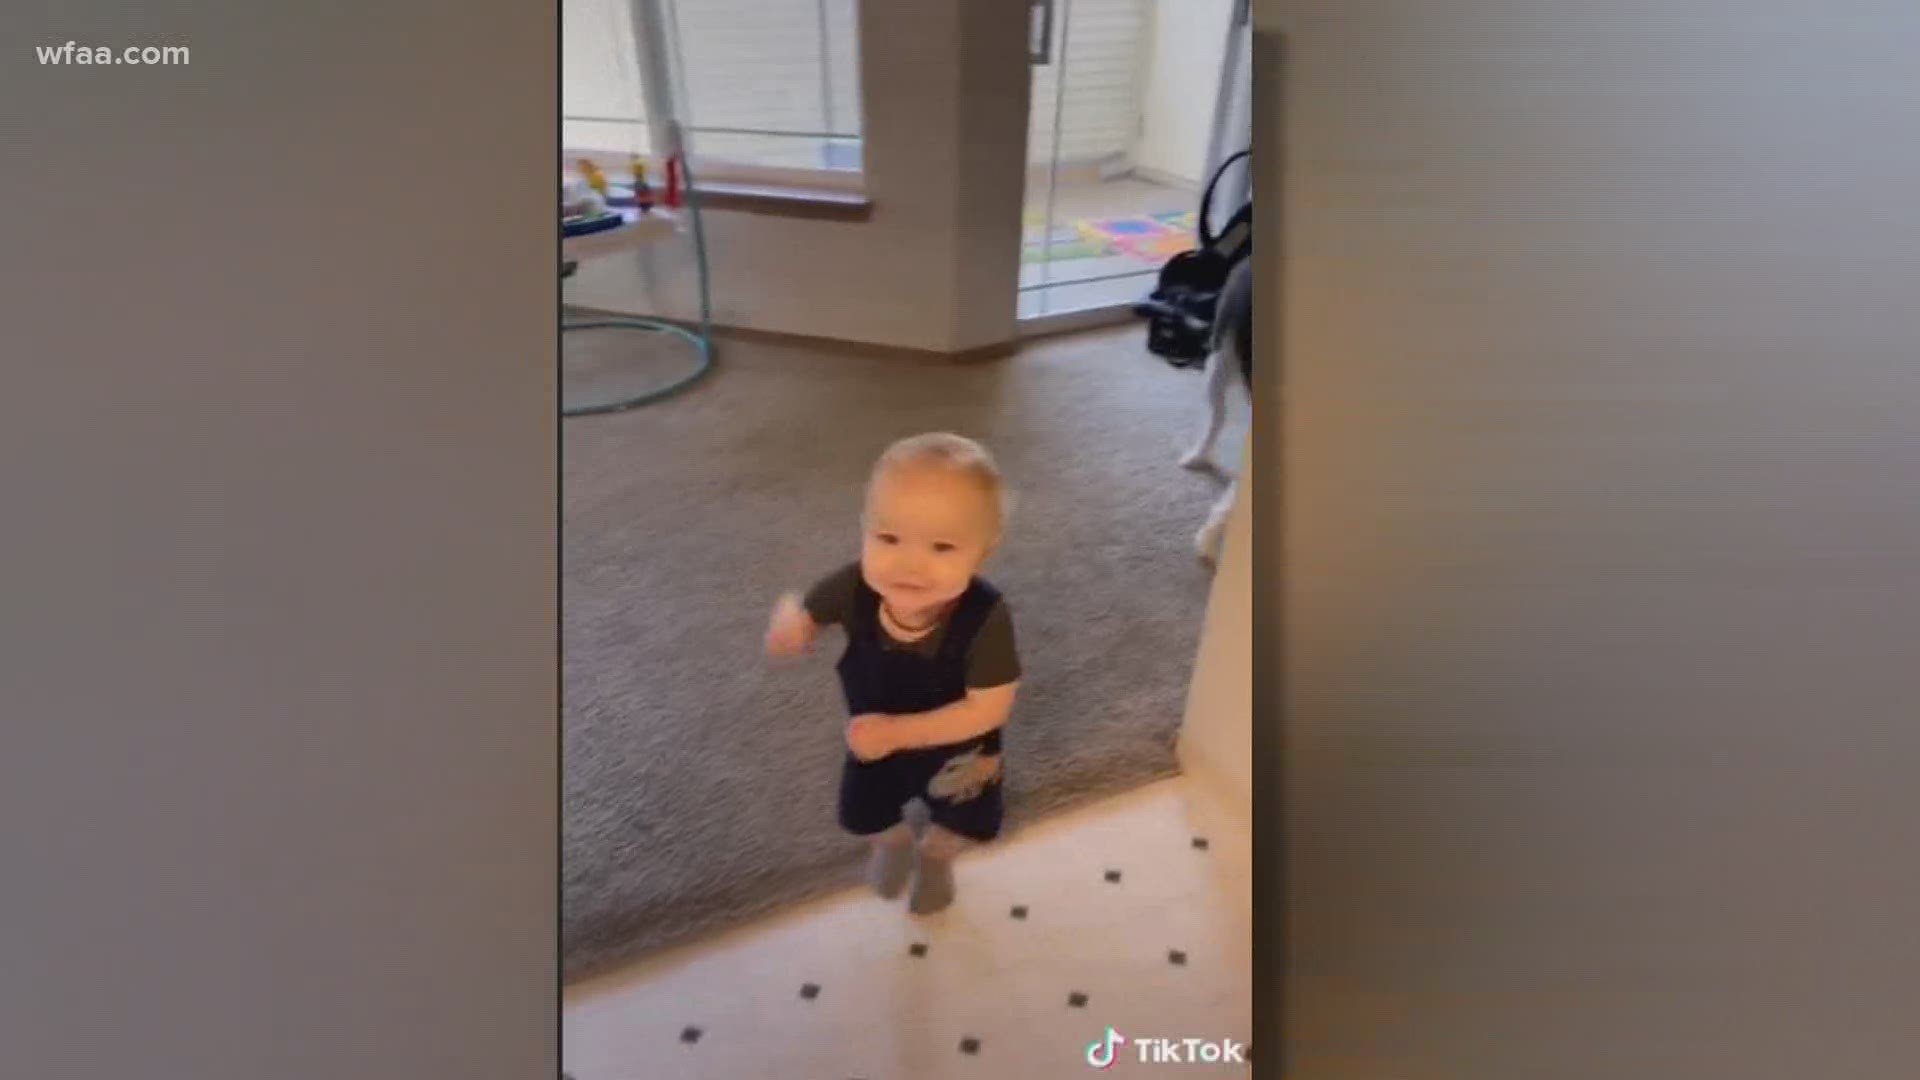 Chelsey Nicole posted this video of her son to TikTok saying, "Anytime I think he's doing something he's not supposed to, I play this song and he comes a dancing."